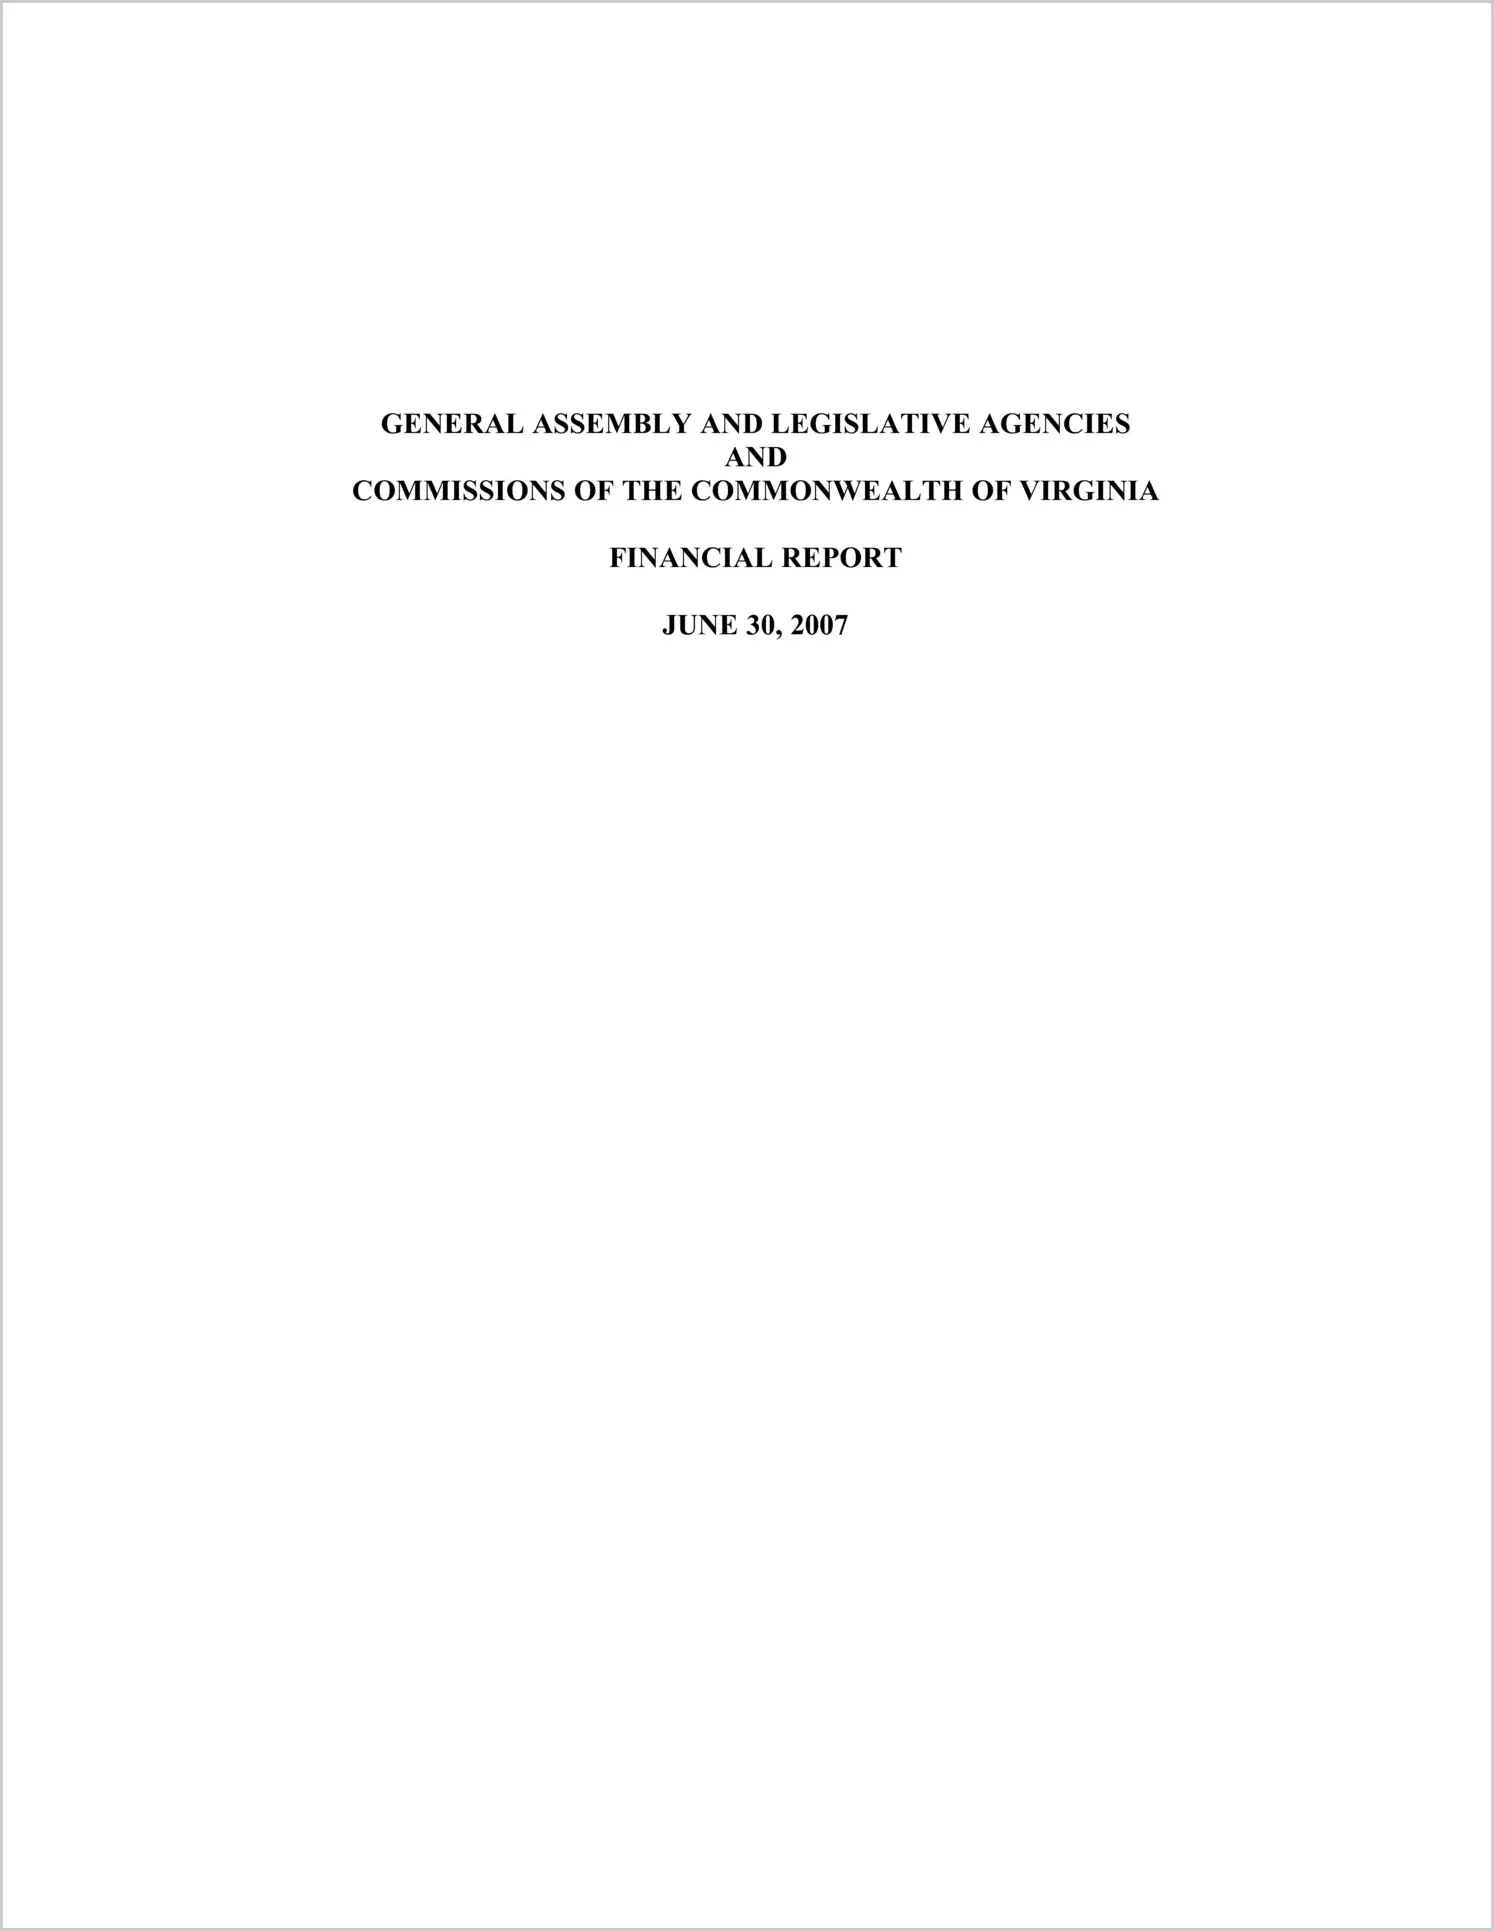 General Assembly and Legislative Agencies and Commissions of the Commonwealth of Virginia Financial Report For The Fiscal Year ended June 30, 2007